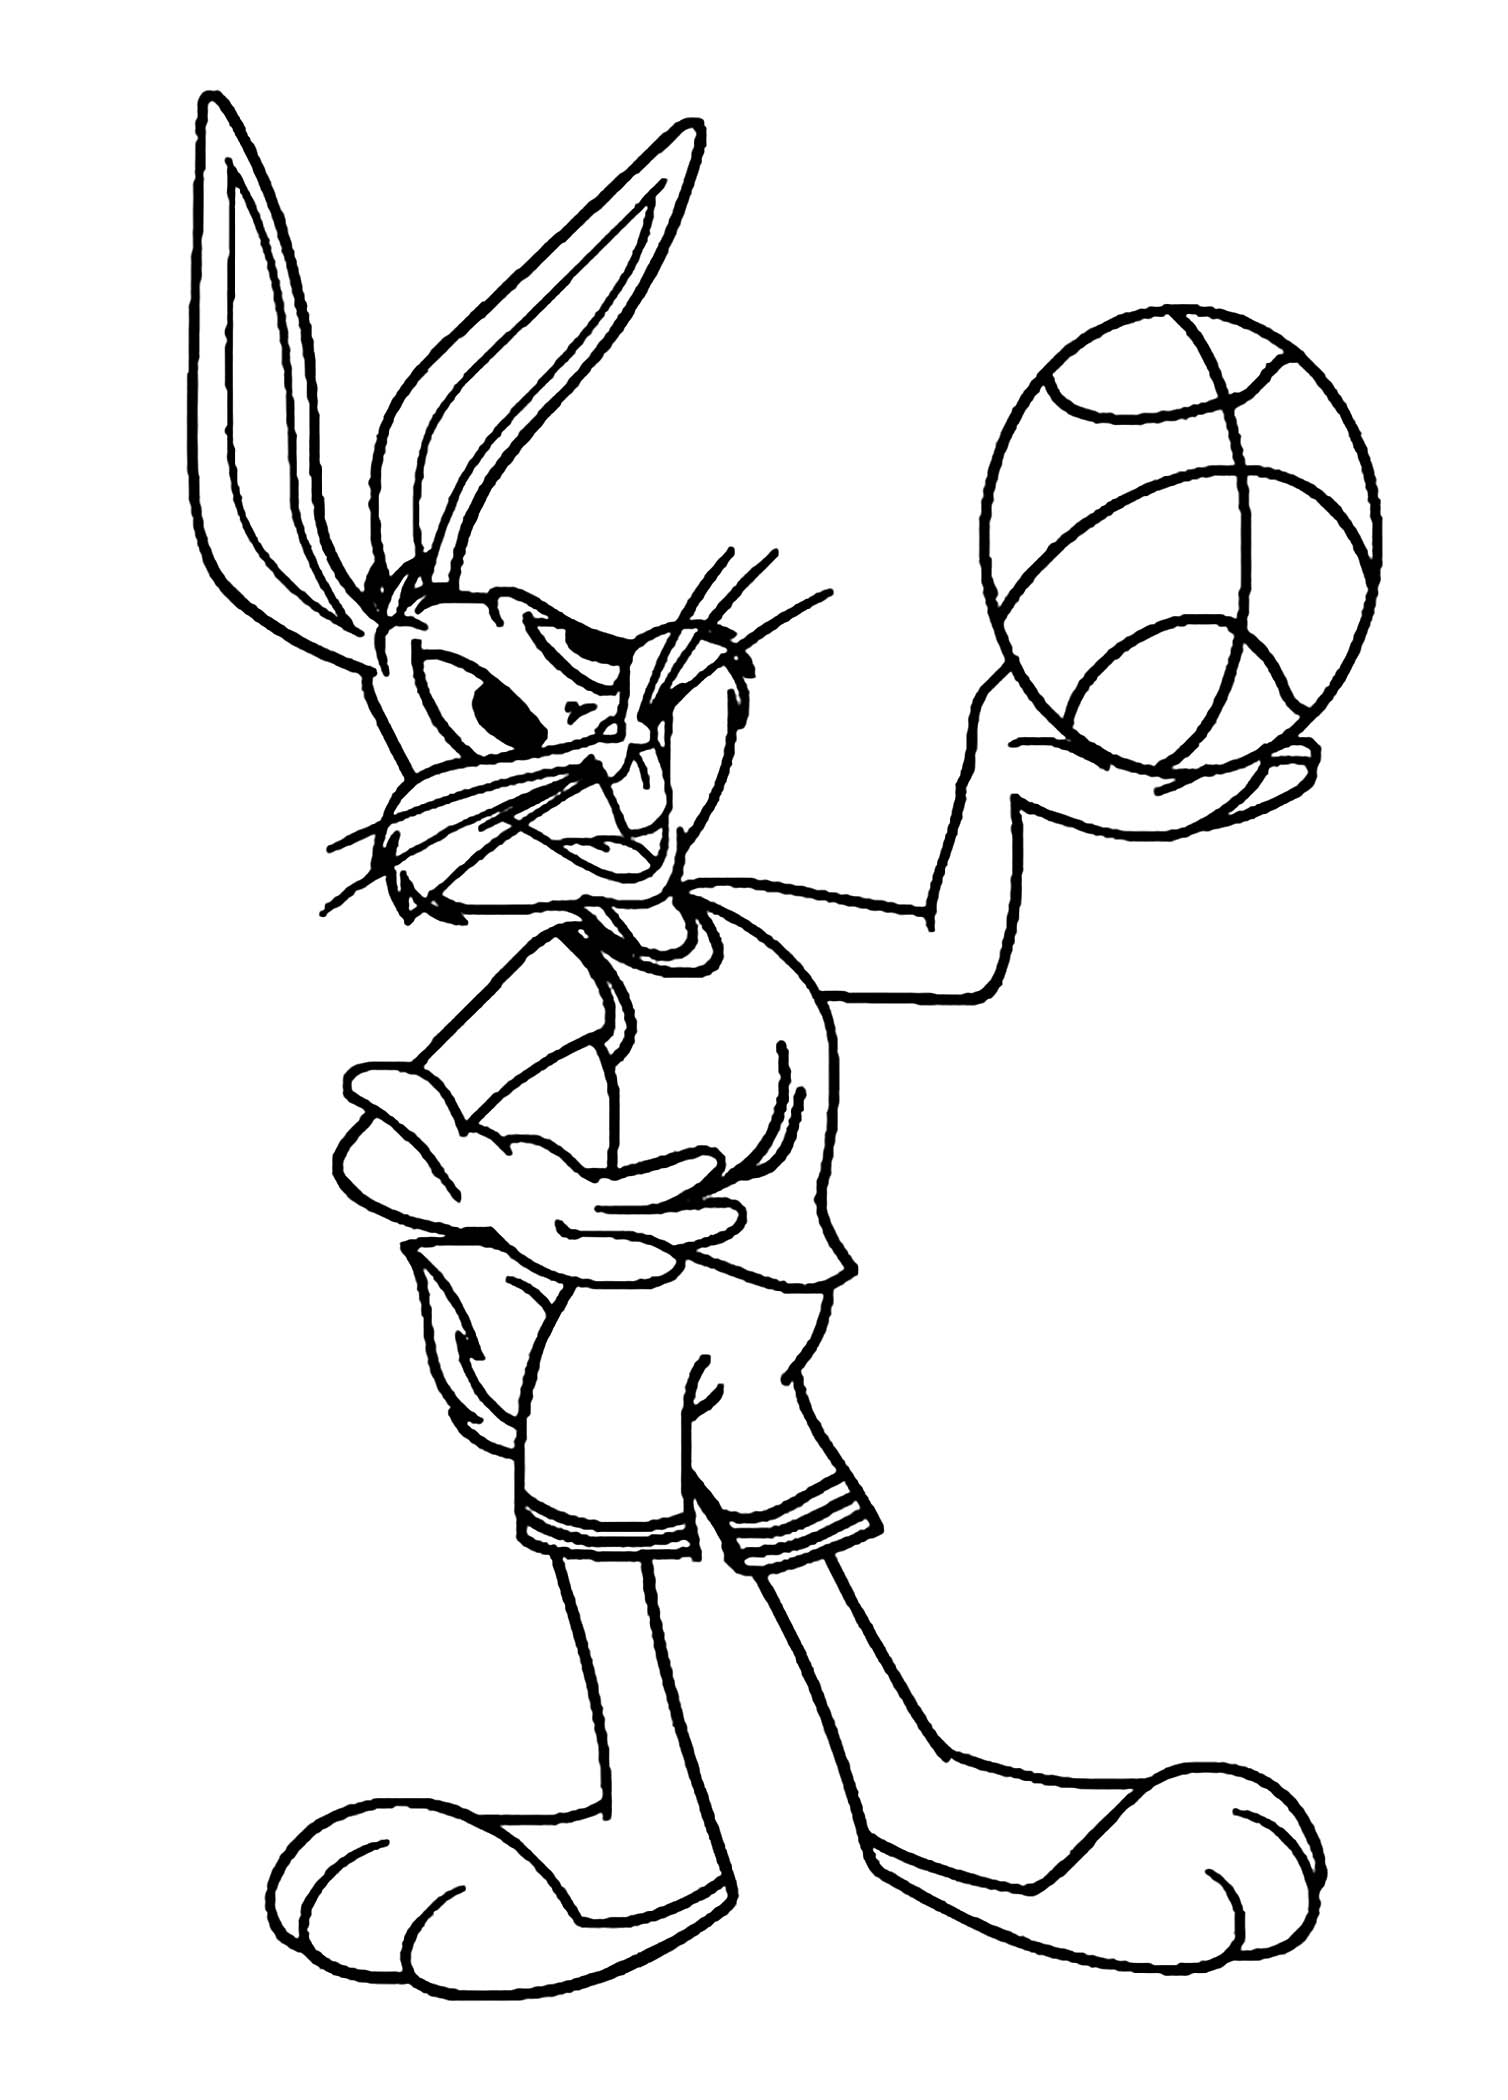 Basketball for kids - Basketball Kids Coloring Pages